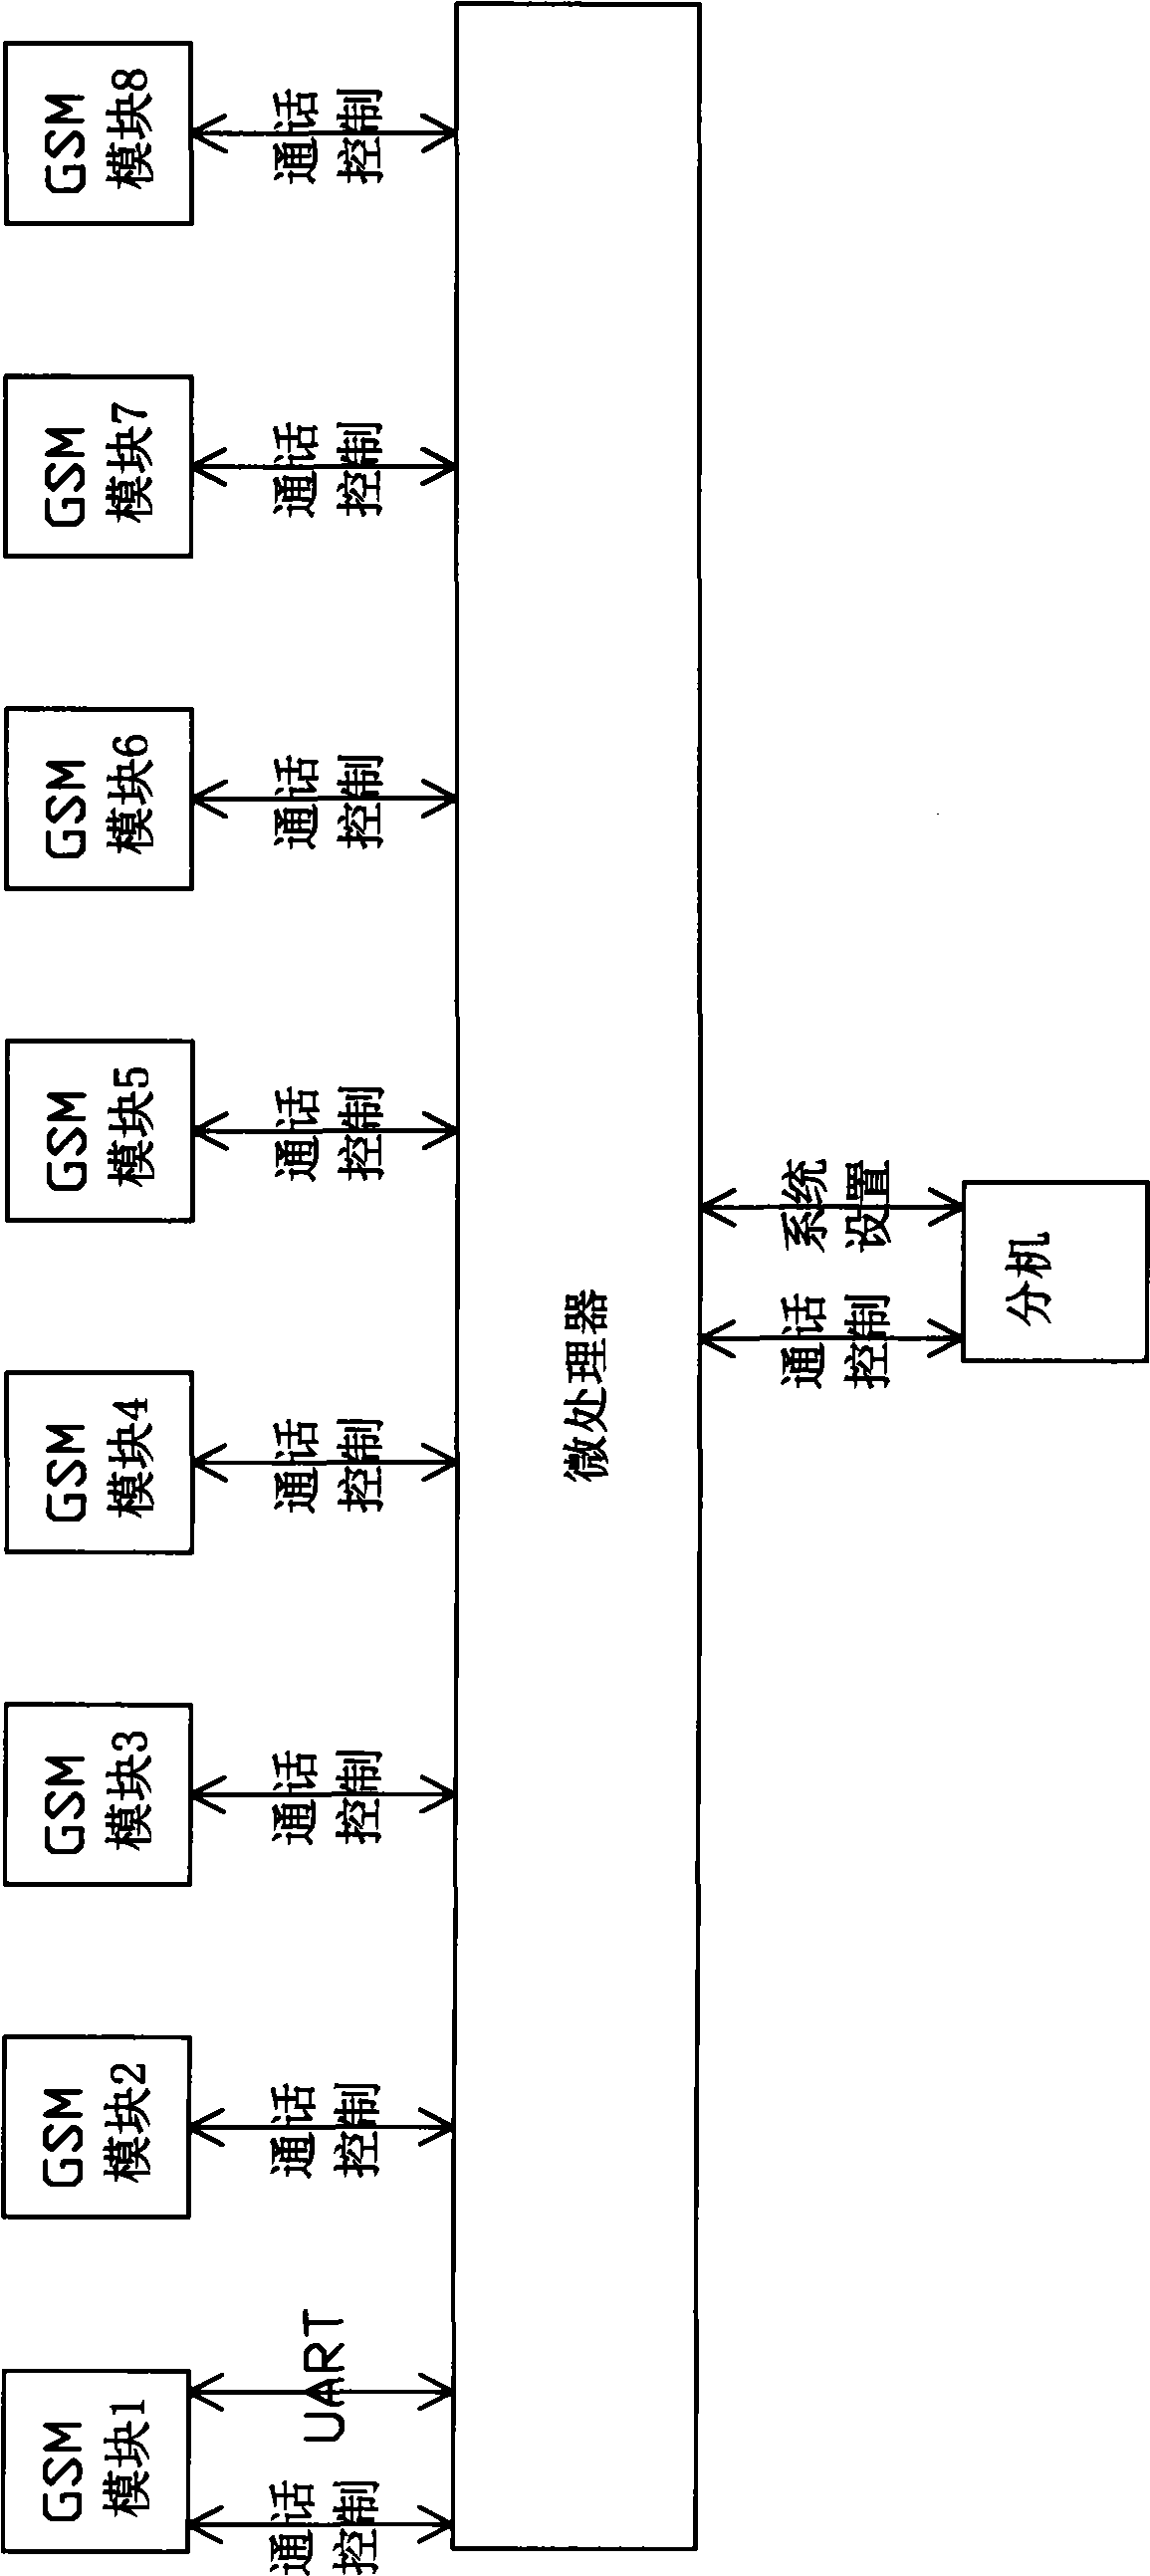 Method and device for realizing calling intelligent forwarding